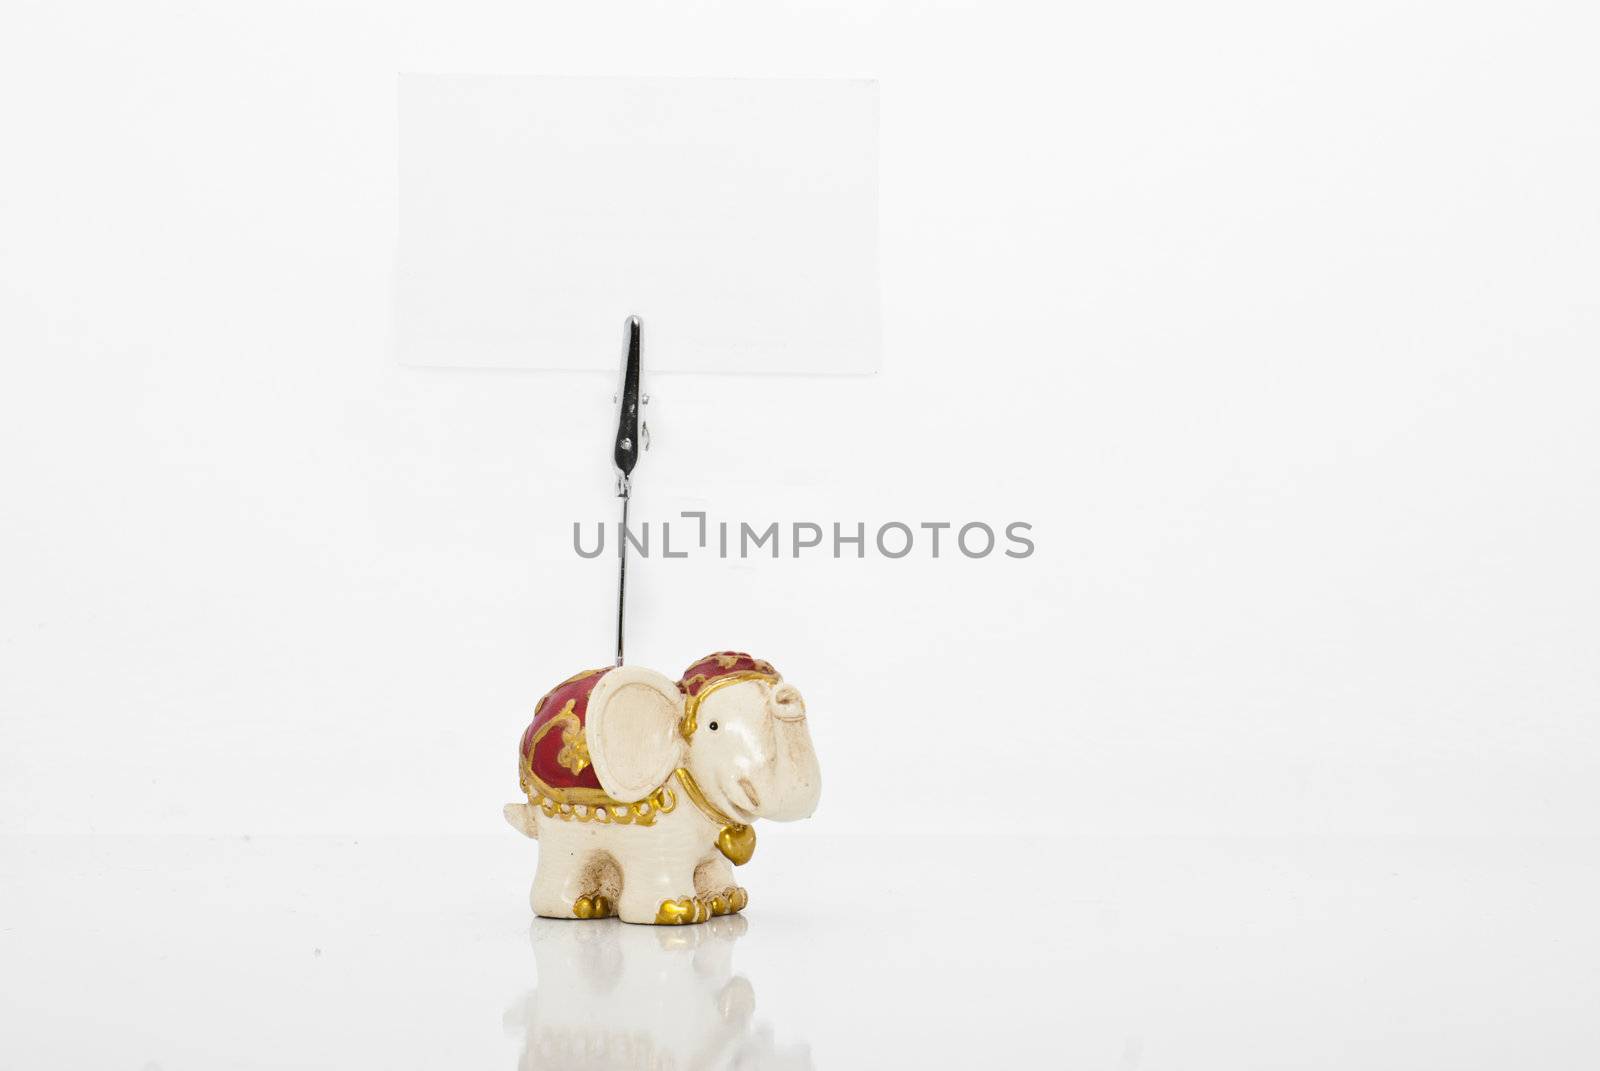  Lucky Elephant memo holder with blank card isolated on a white background.